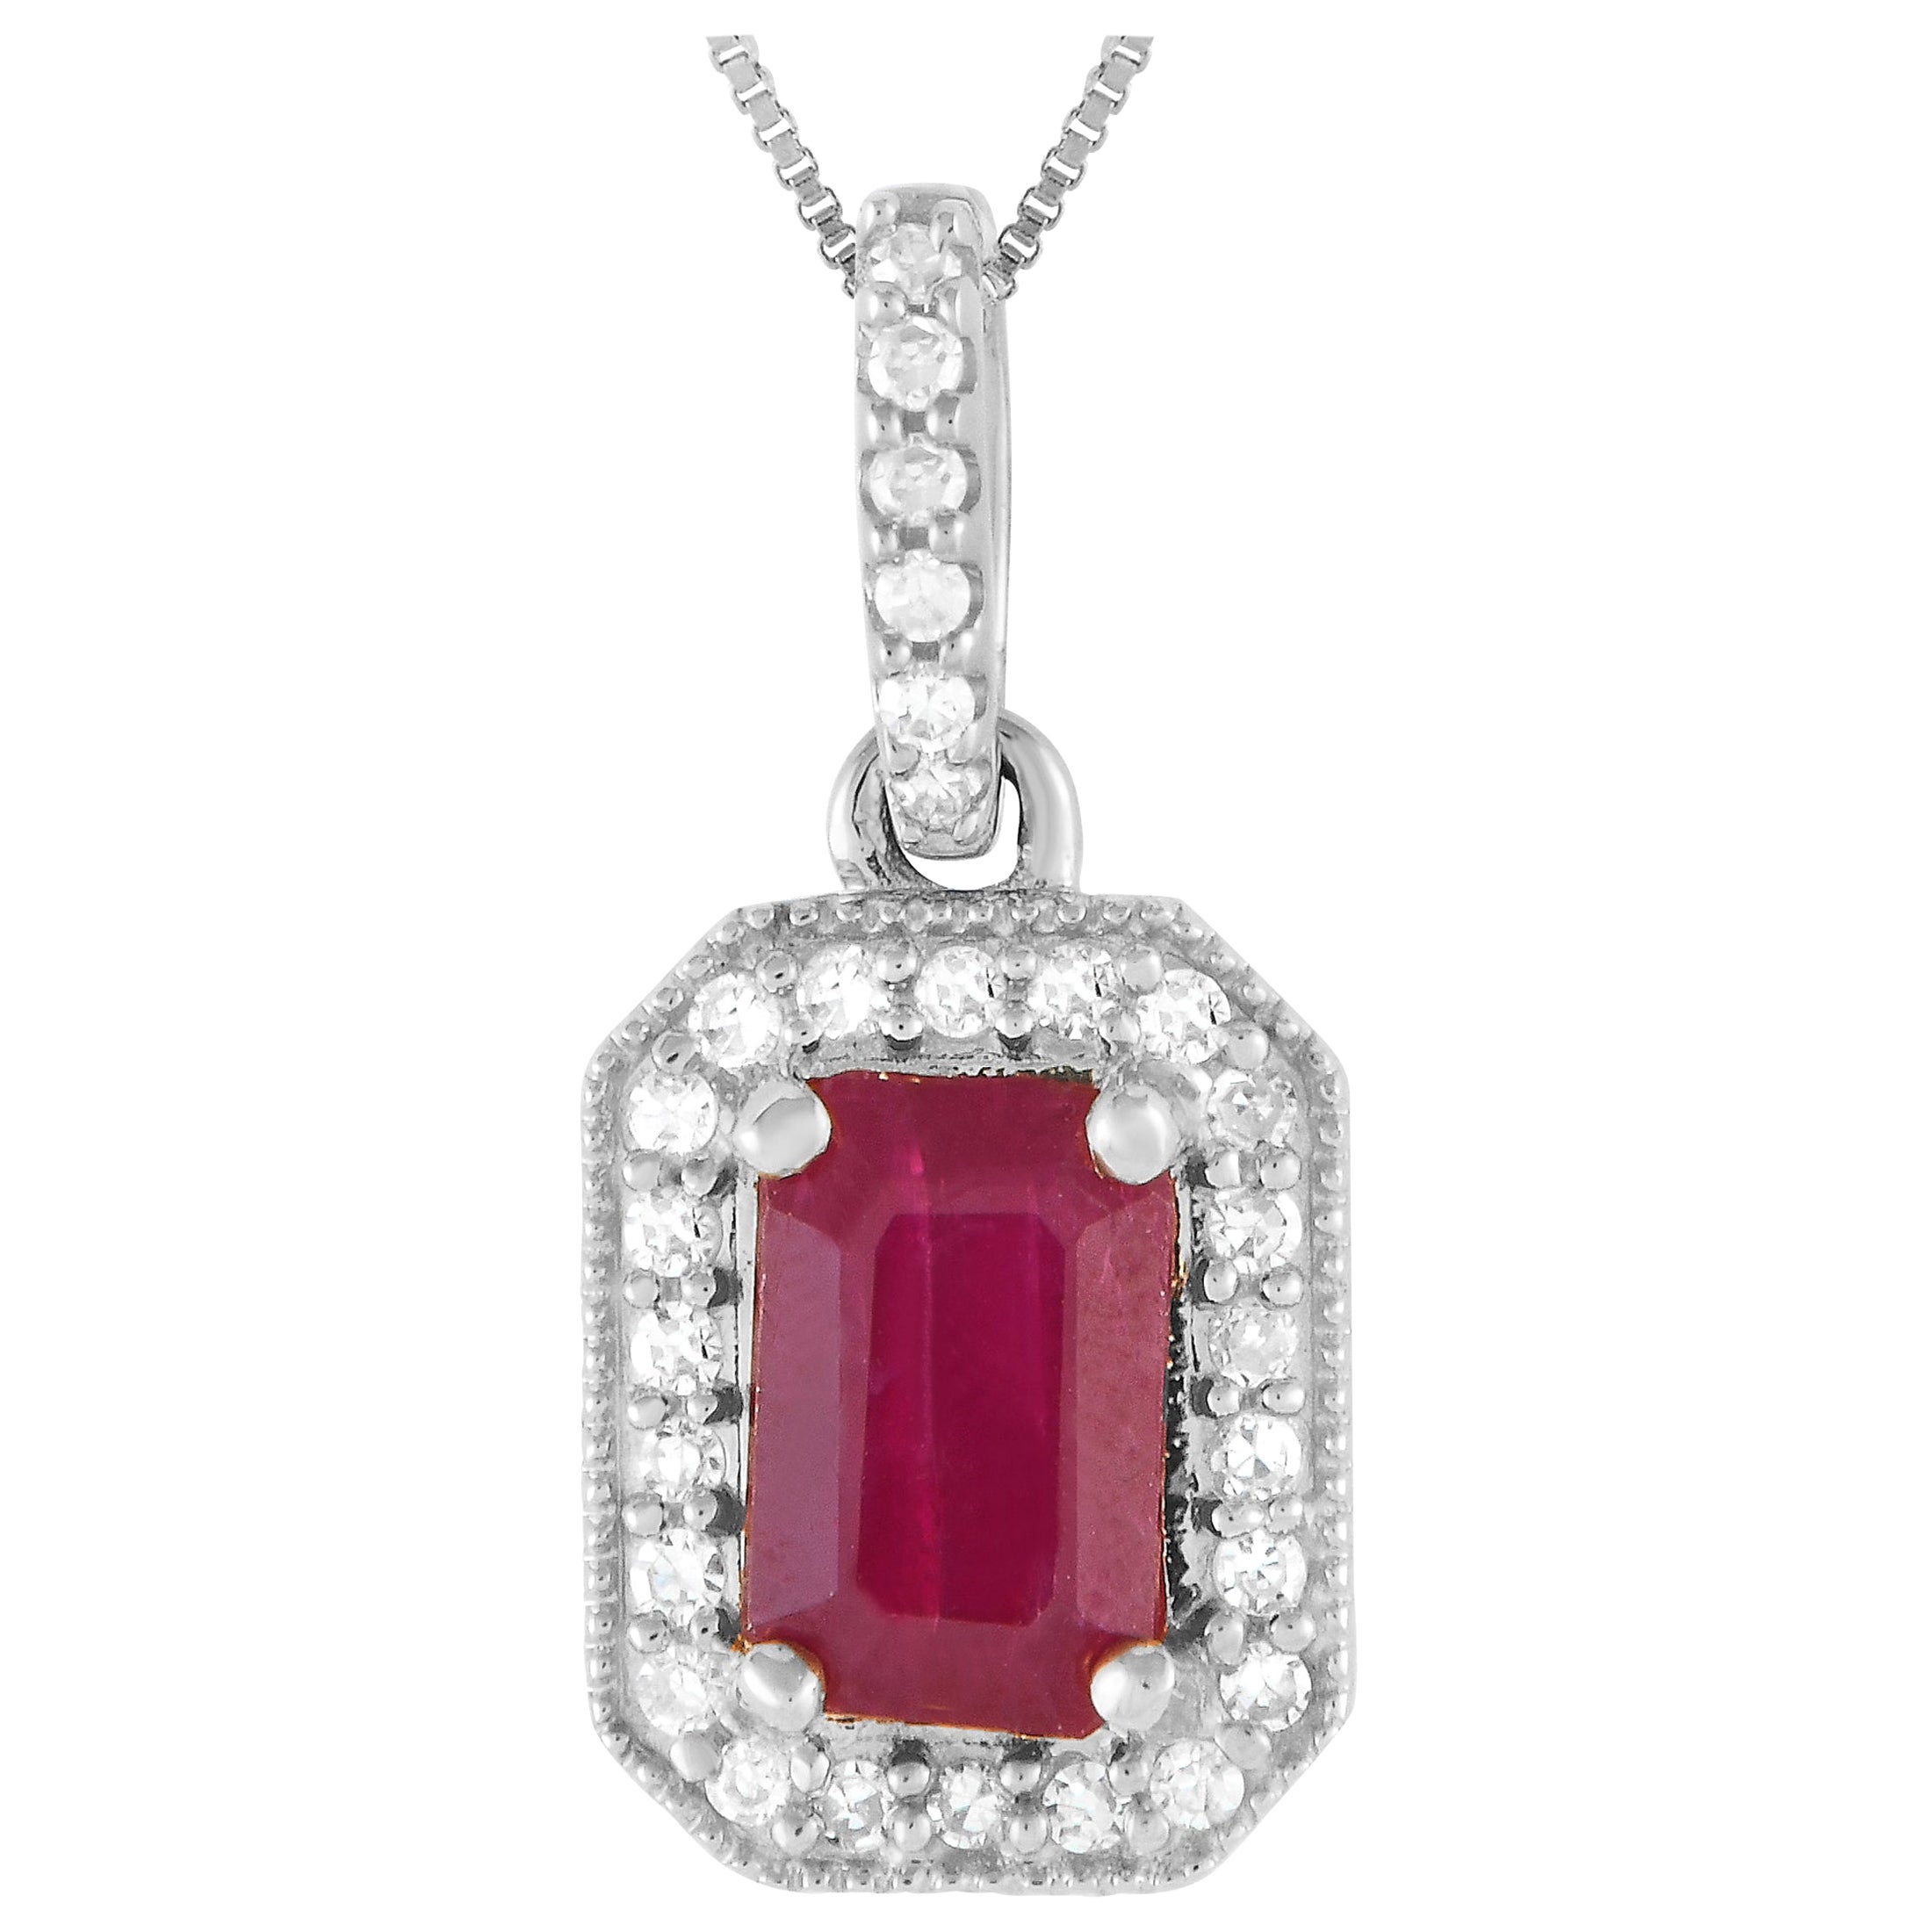 LB Exclusive 14K White Gold 0.10ct Diamond and Ruby Necklace PD4-16050WRU For Sale